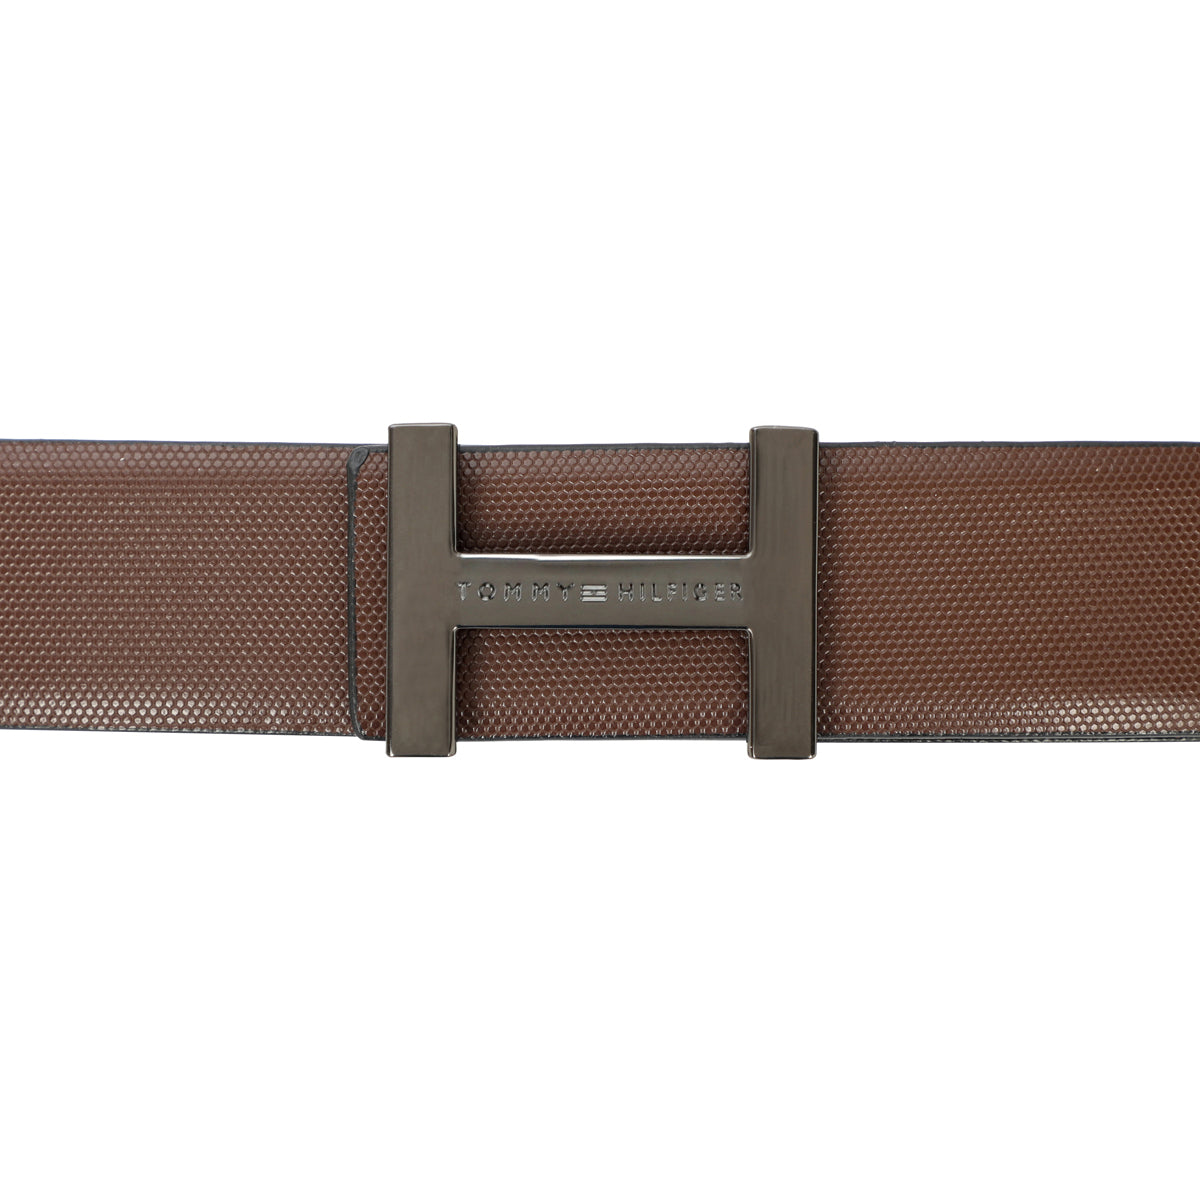 Tommy Hilfiger Witherspoon Mens Leather Reversible Belt Brown